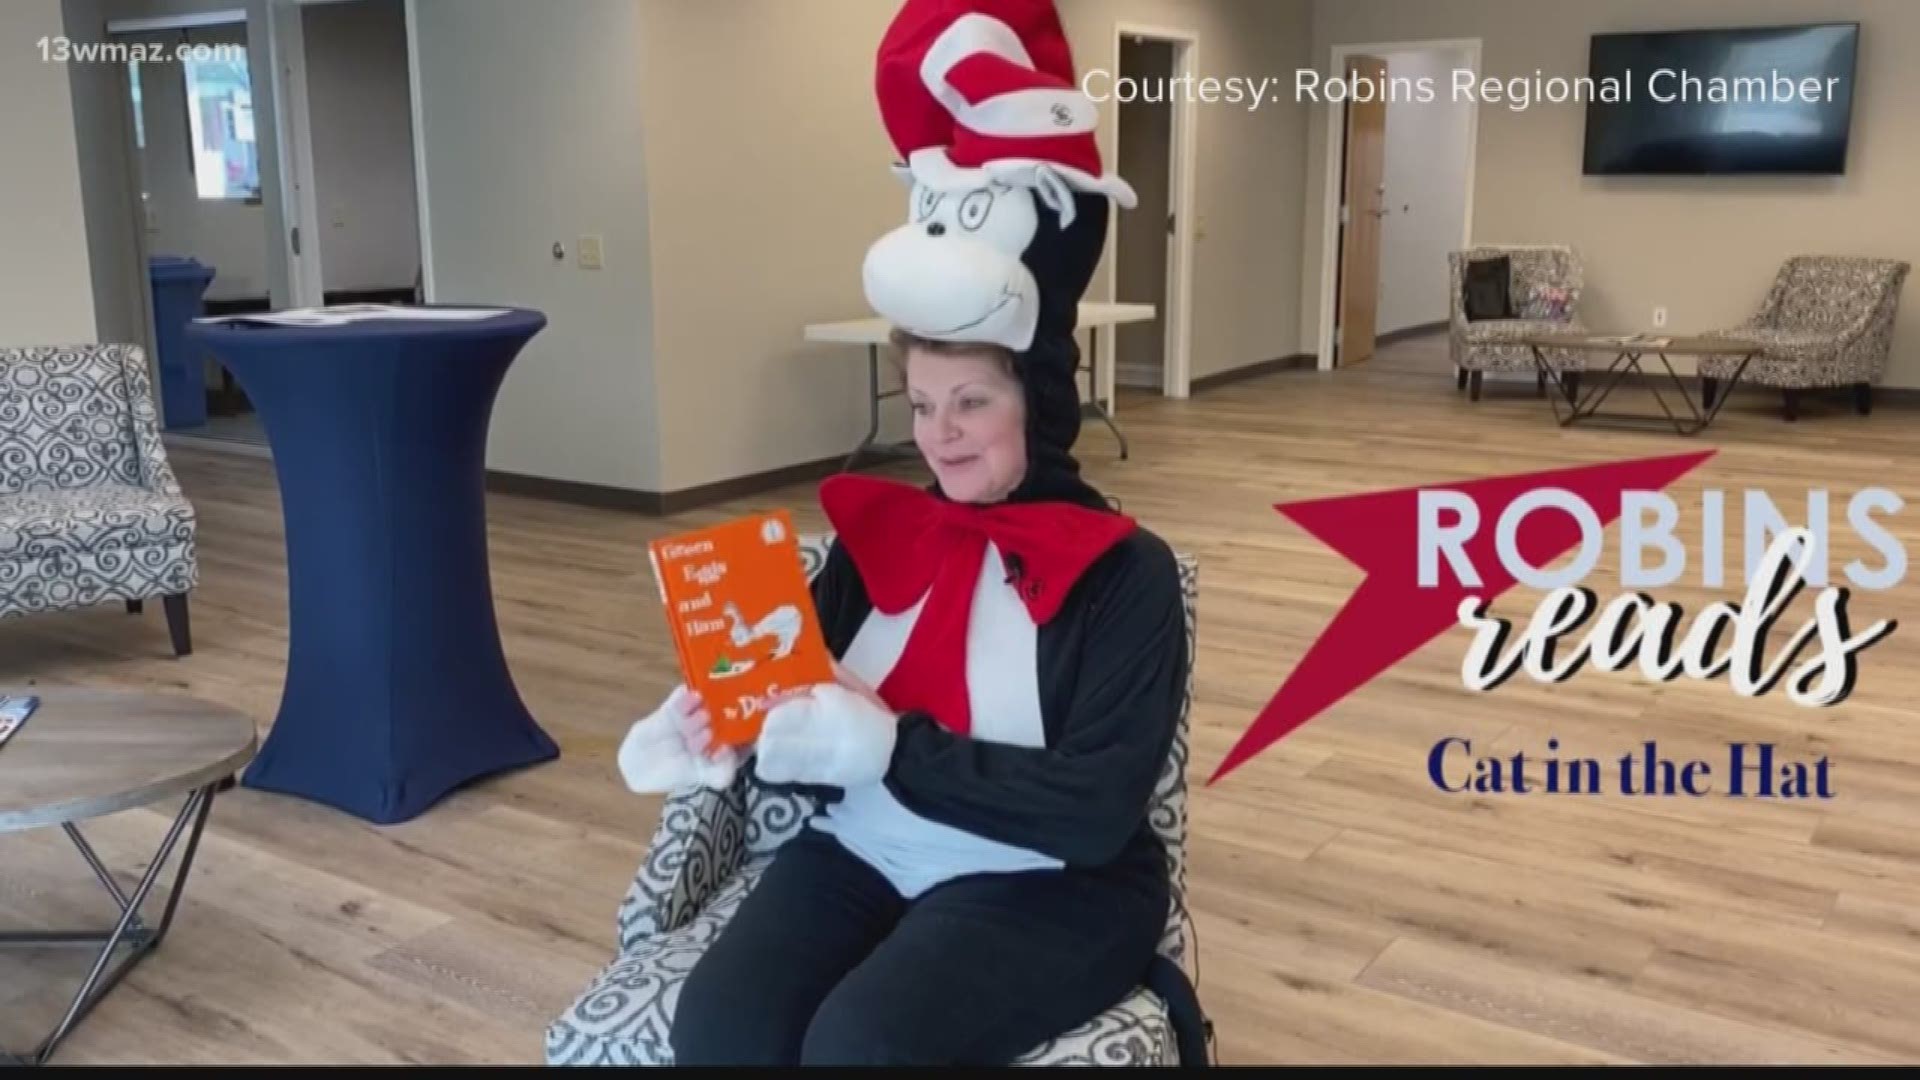 With the Robins Reads book challenge, people all over Central Georgia are submitting videos of themselves reading children's books and bedtime stories.